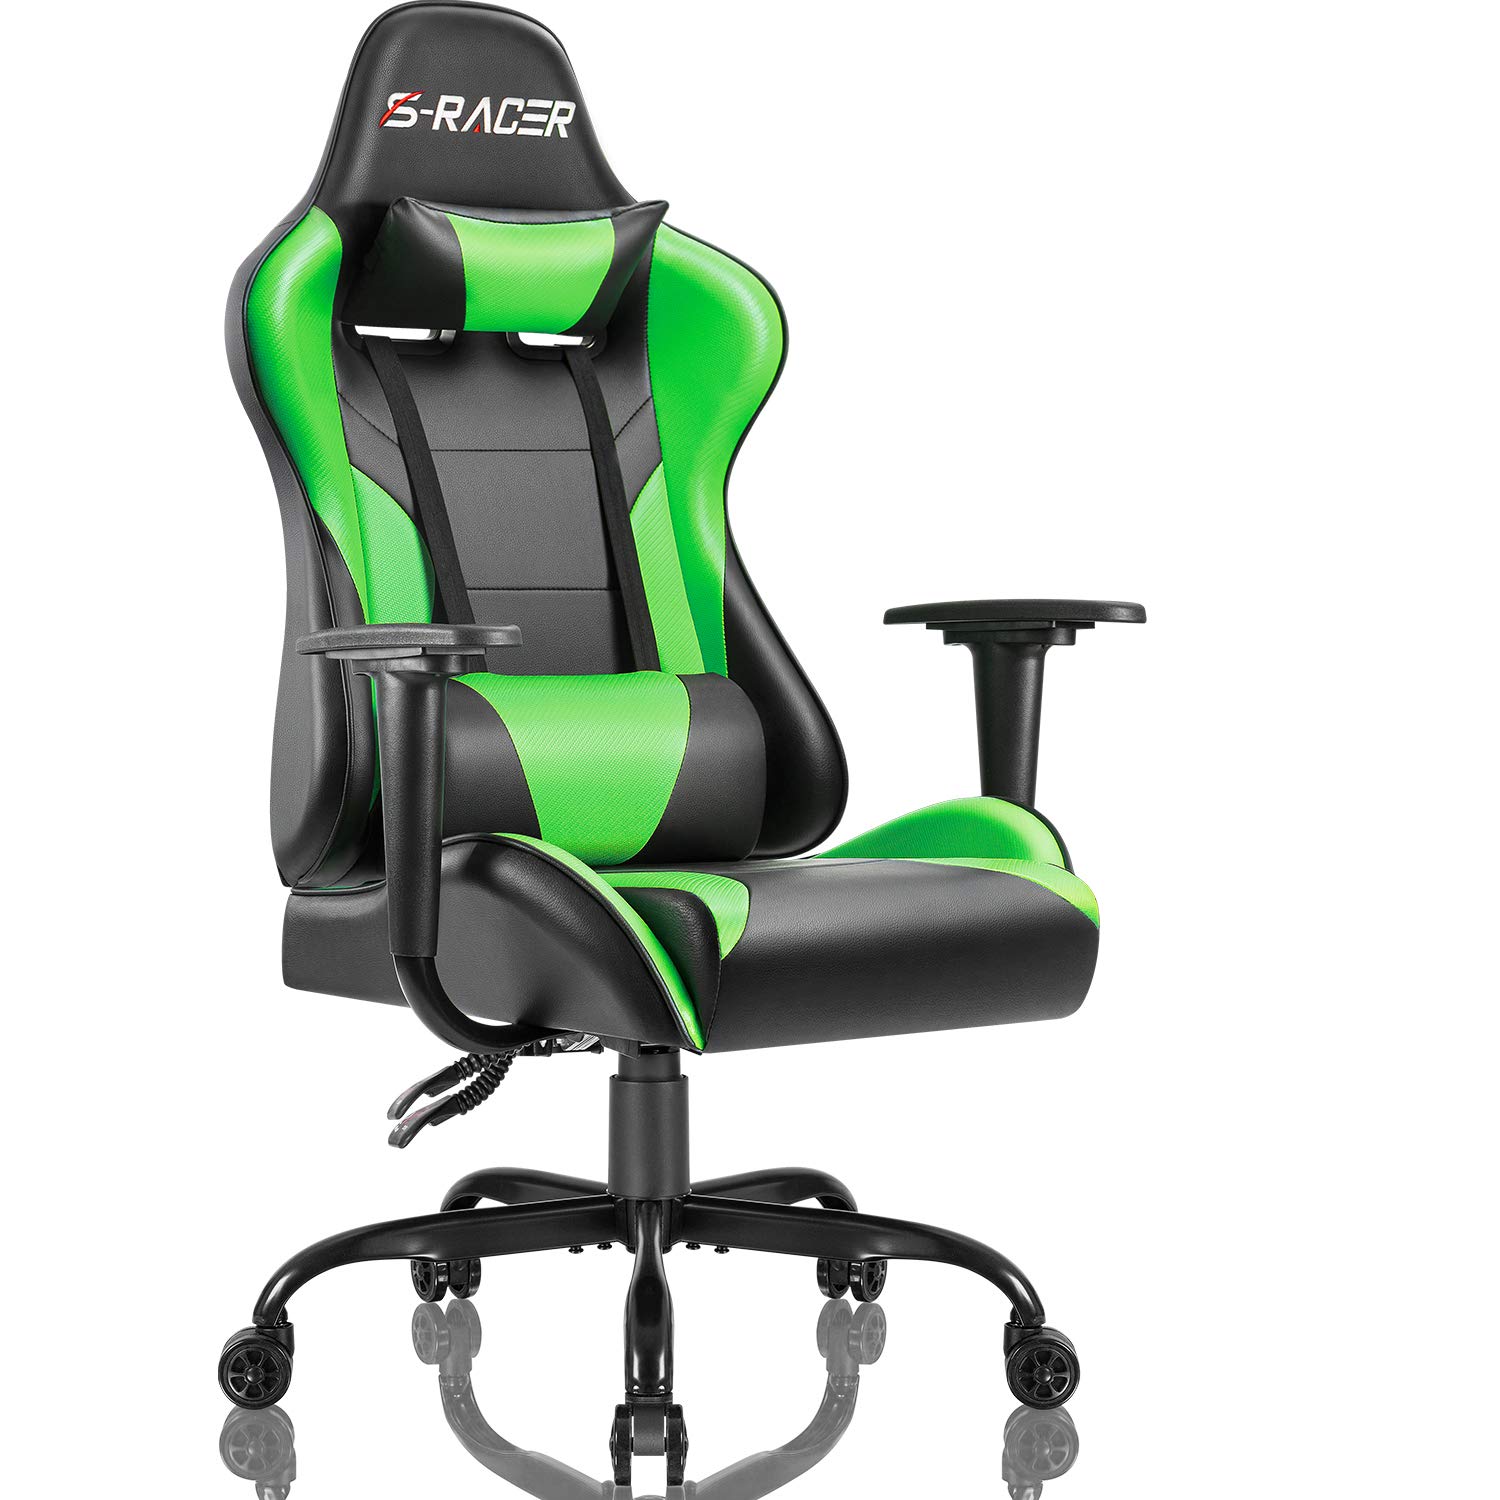 Lacoo Gaming Chair PU Leather Reclining Racing Style Ergonomic Office Chair with Headrest and Lumbar Support, Green - image 1 of 7